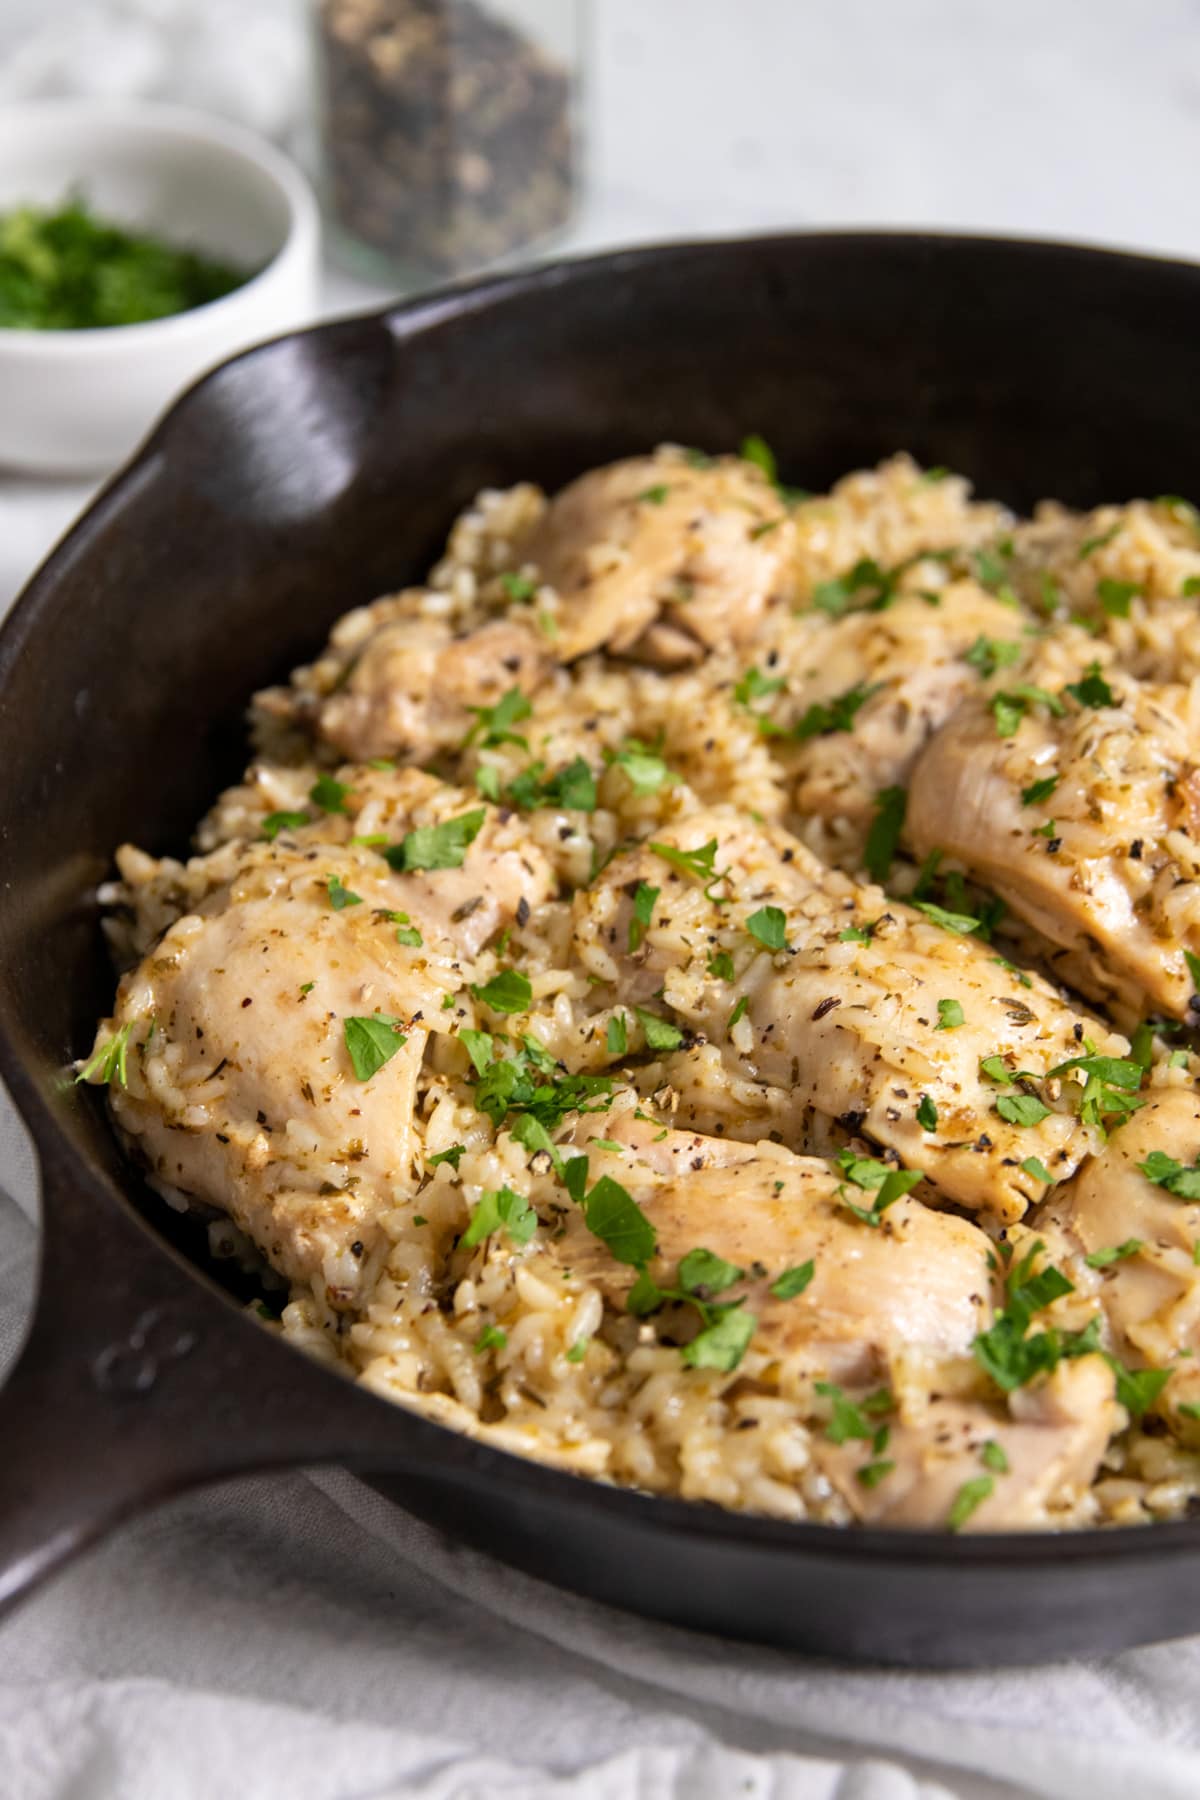 Looking into a pan of cooked chicken and rice. Everything is flavored with visible dried Italian herbs and there is an abundance of chopped fresh parsley sprinkled on top.